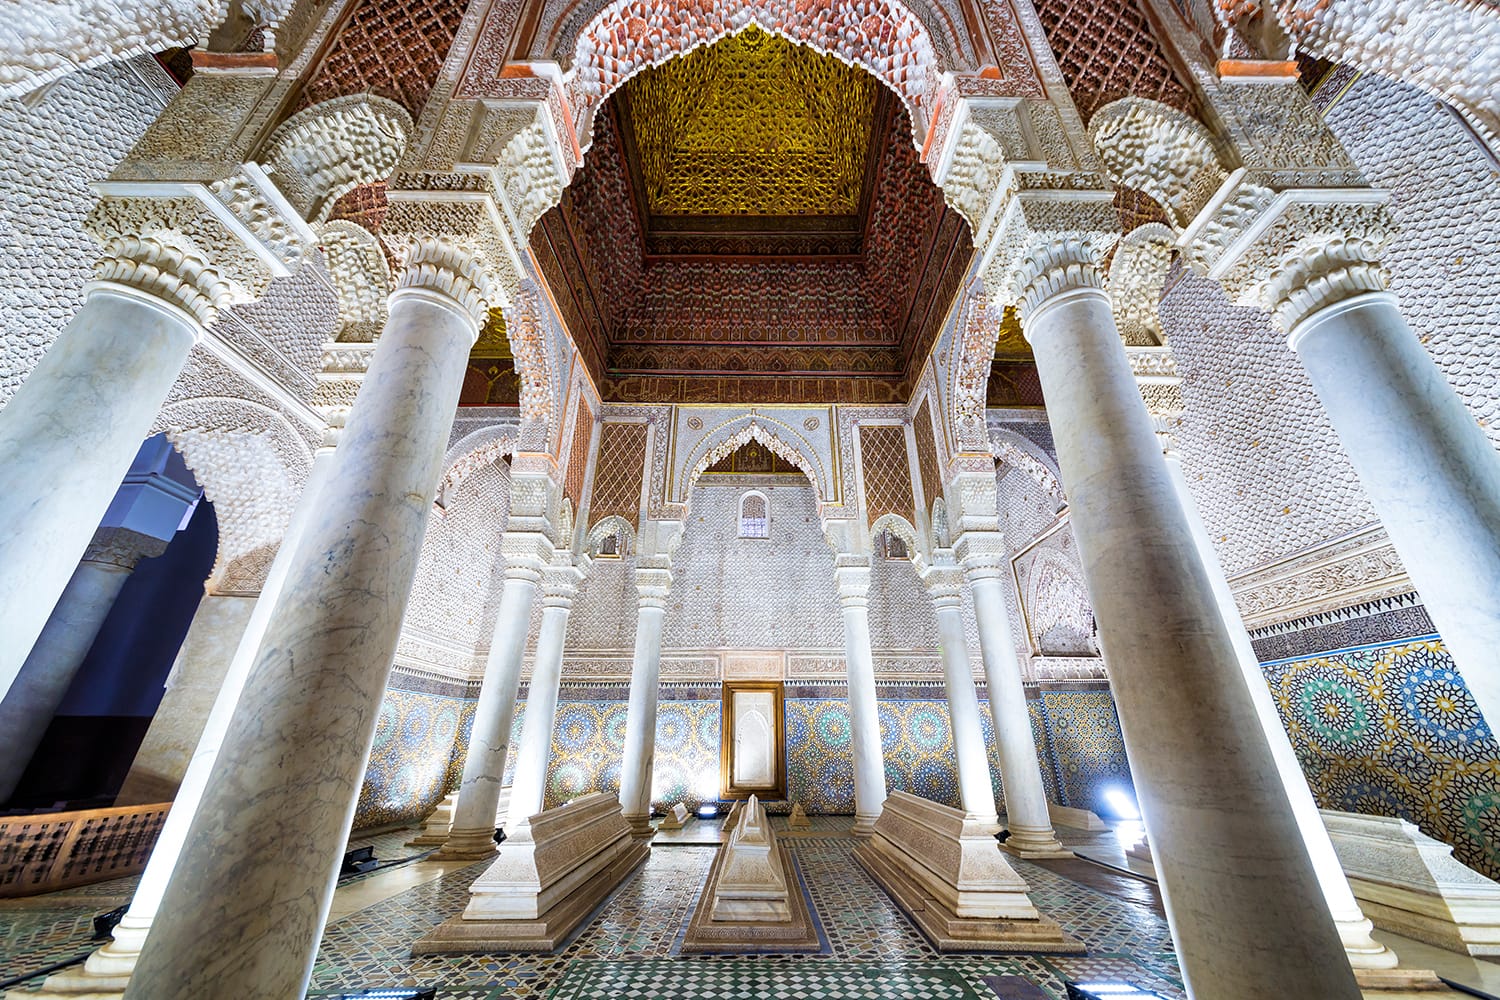 The room with the twelve columns in Saadian Tombs. These tombs are sepulchres of Saadi Dynasty members and are a major attraction for visitors in Marrakech, Morocco